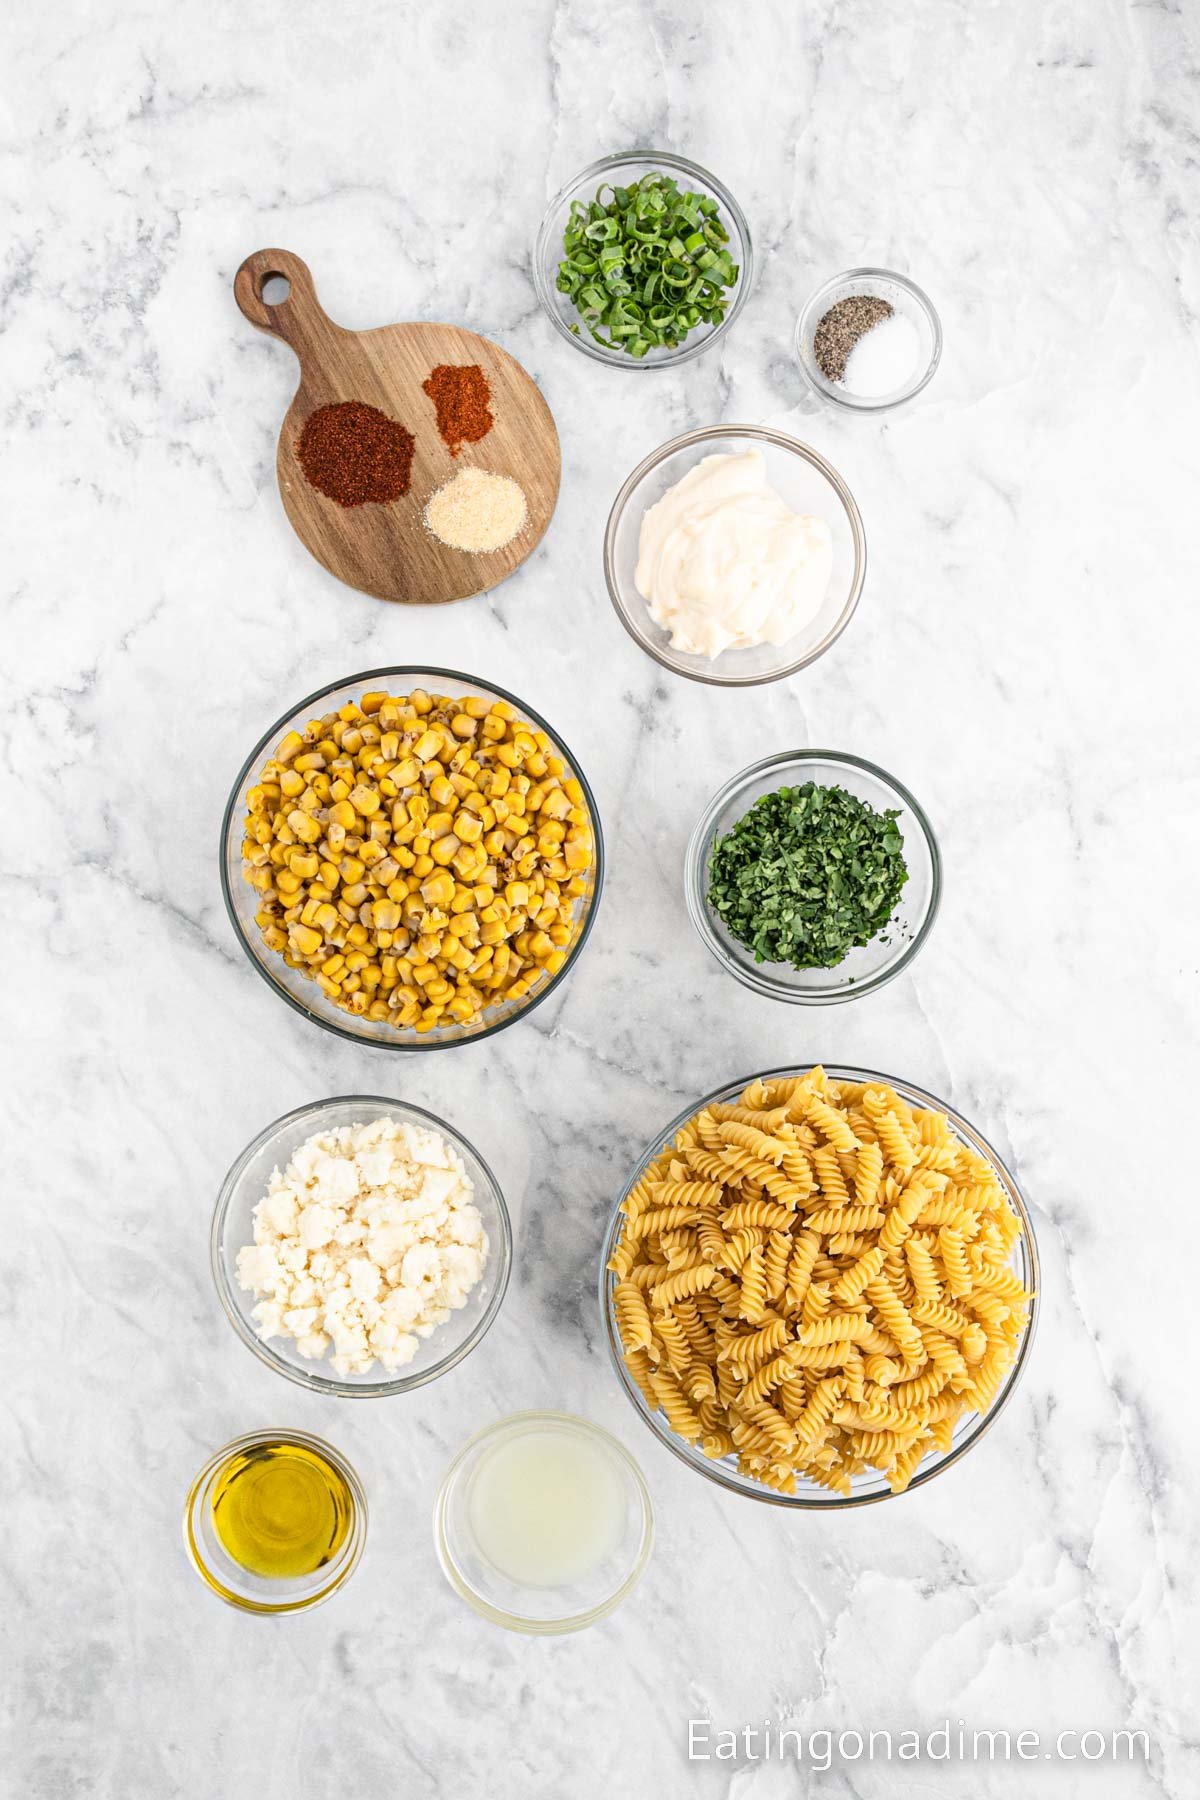 Ingredients needed for the Mexican Street Corn Pasta Salad - Rotini Pasta, olive oil, corn kernels, cotija crumbled cheese, cilantro, green onions, mayonnaise, chili powder, lime, garlic powder, cayenne pepper salt and pepper